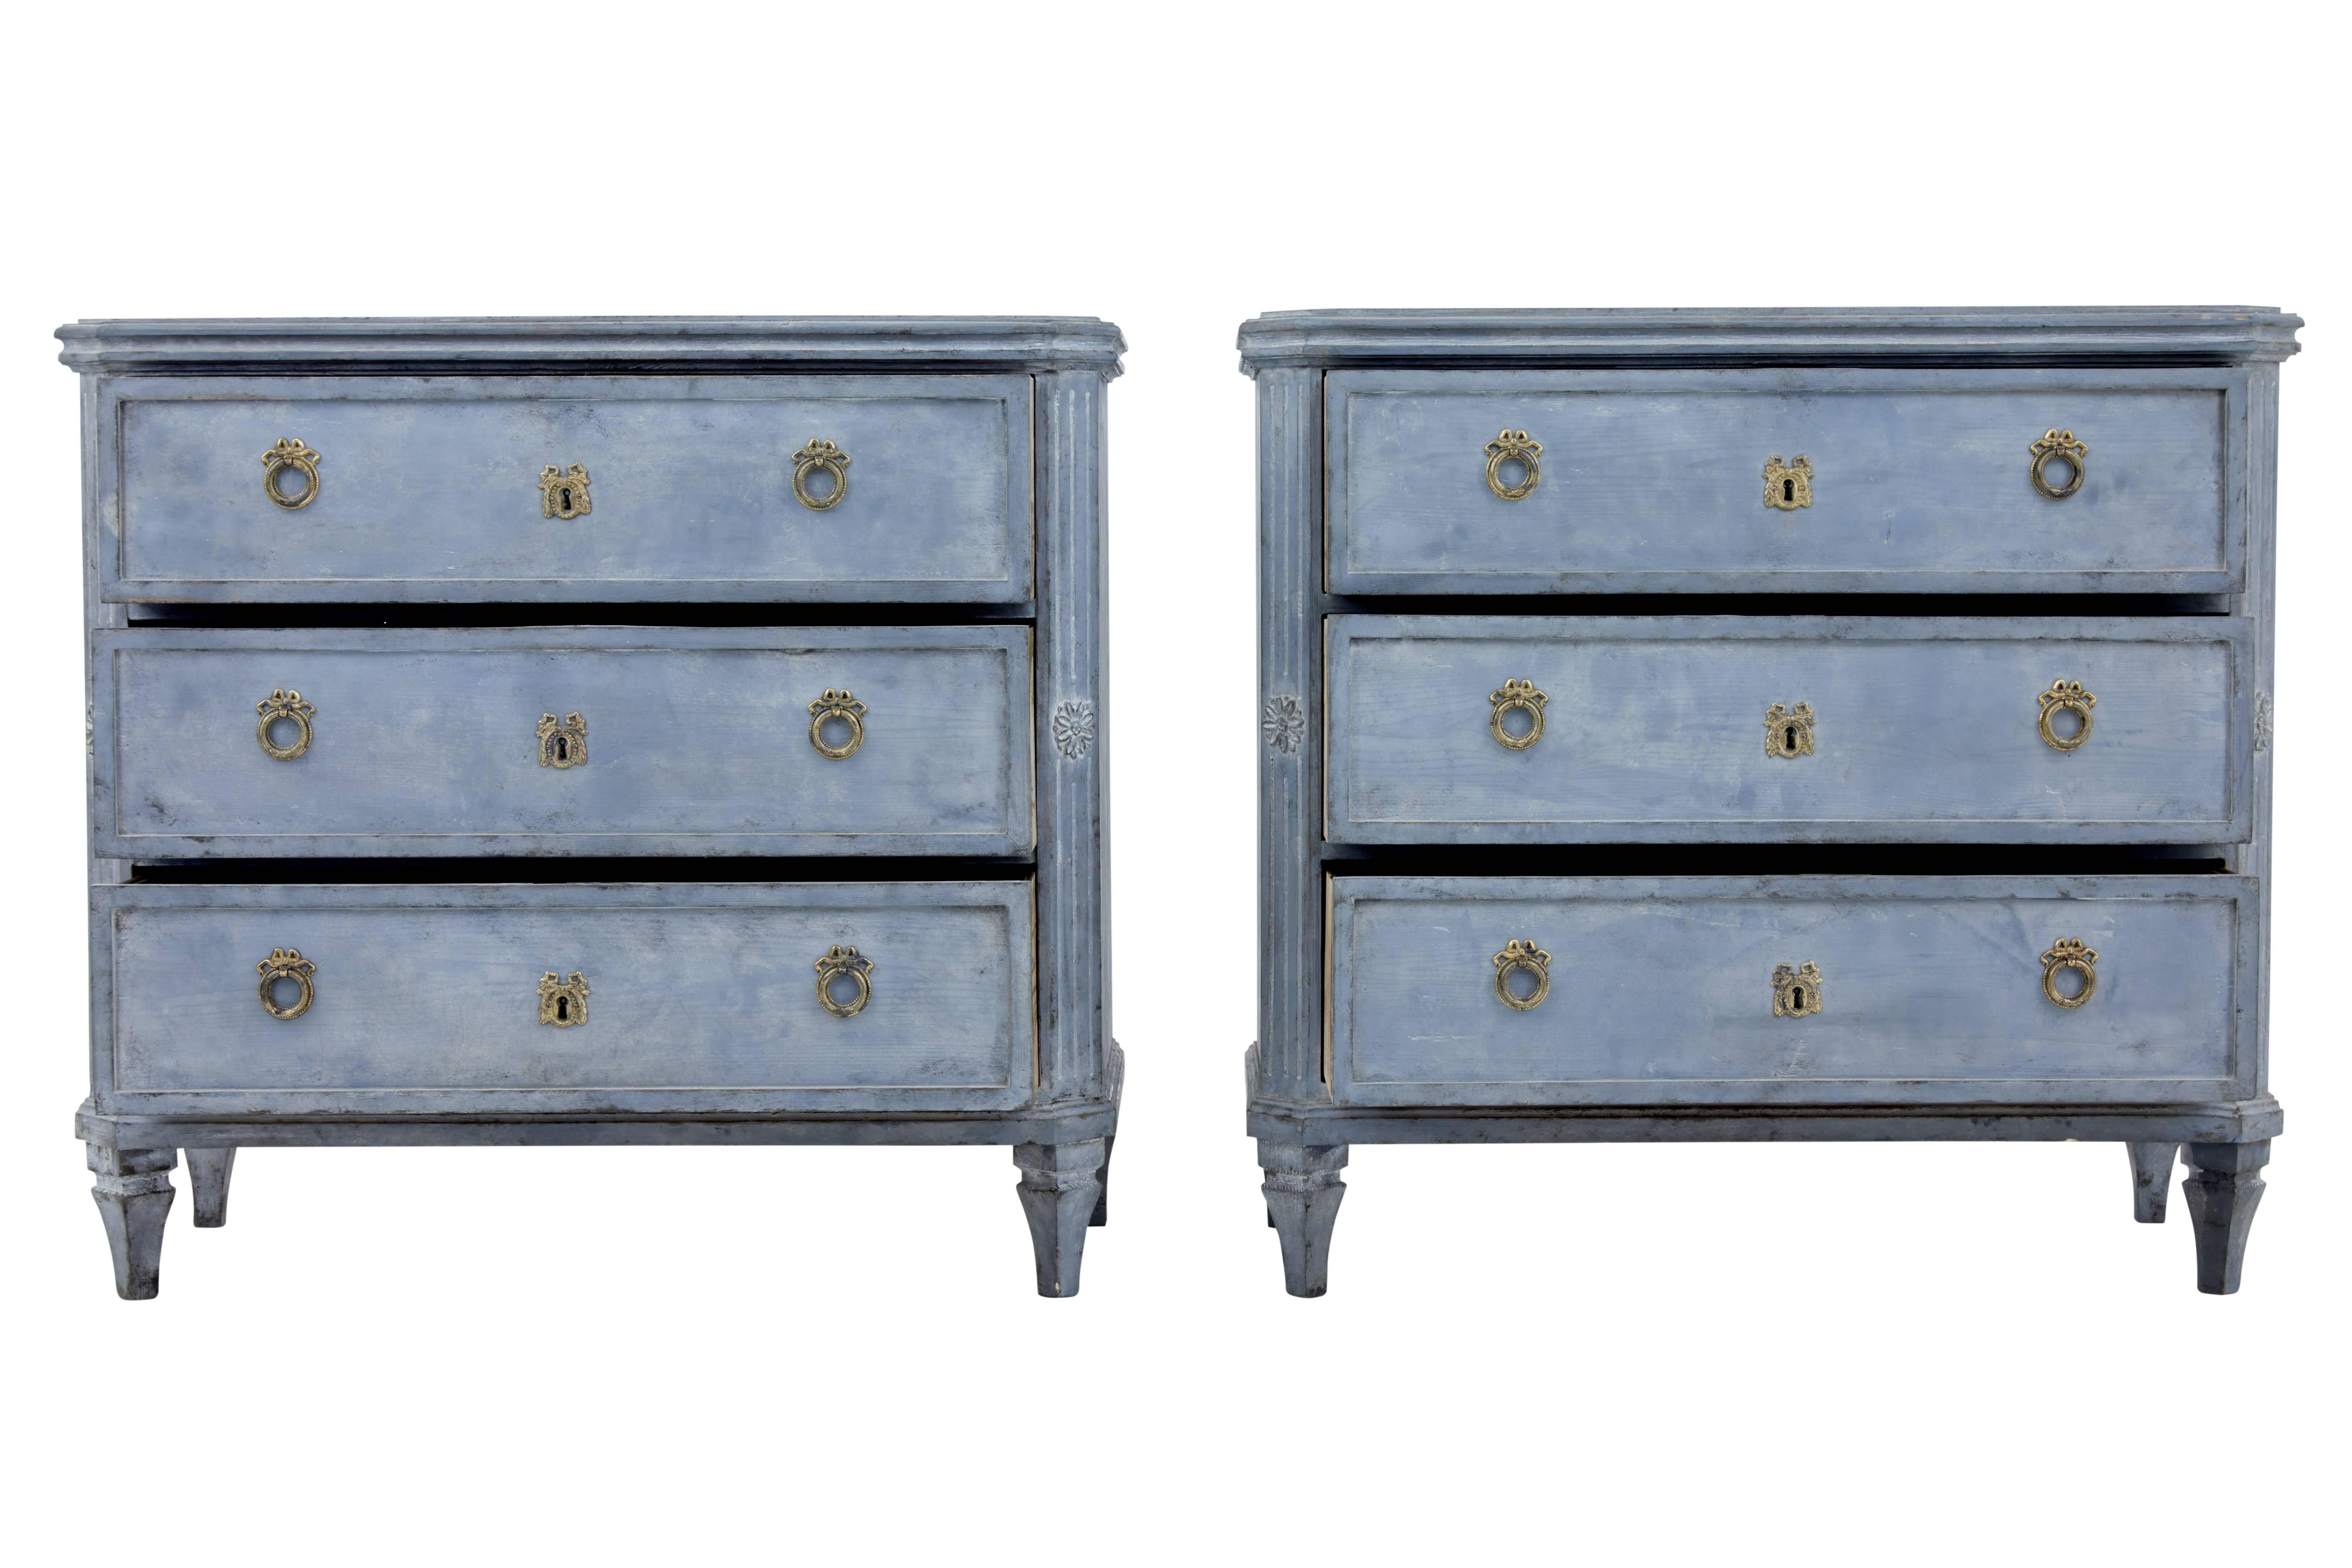 Pair of Swedish painted commodes, circa 1860.

Three drawers with brass ring handles and escutheons. Later paint has now taken on a weathered appearance.

Fluted canted corners with applied rosettes.

Faded paint and minor losses.